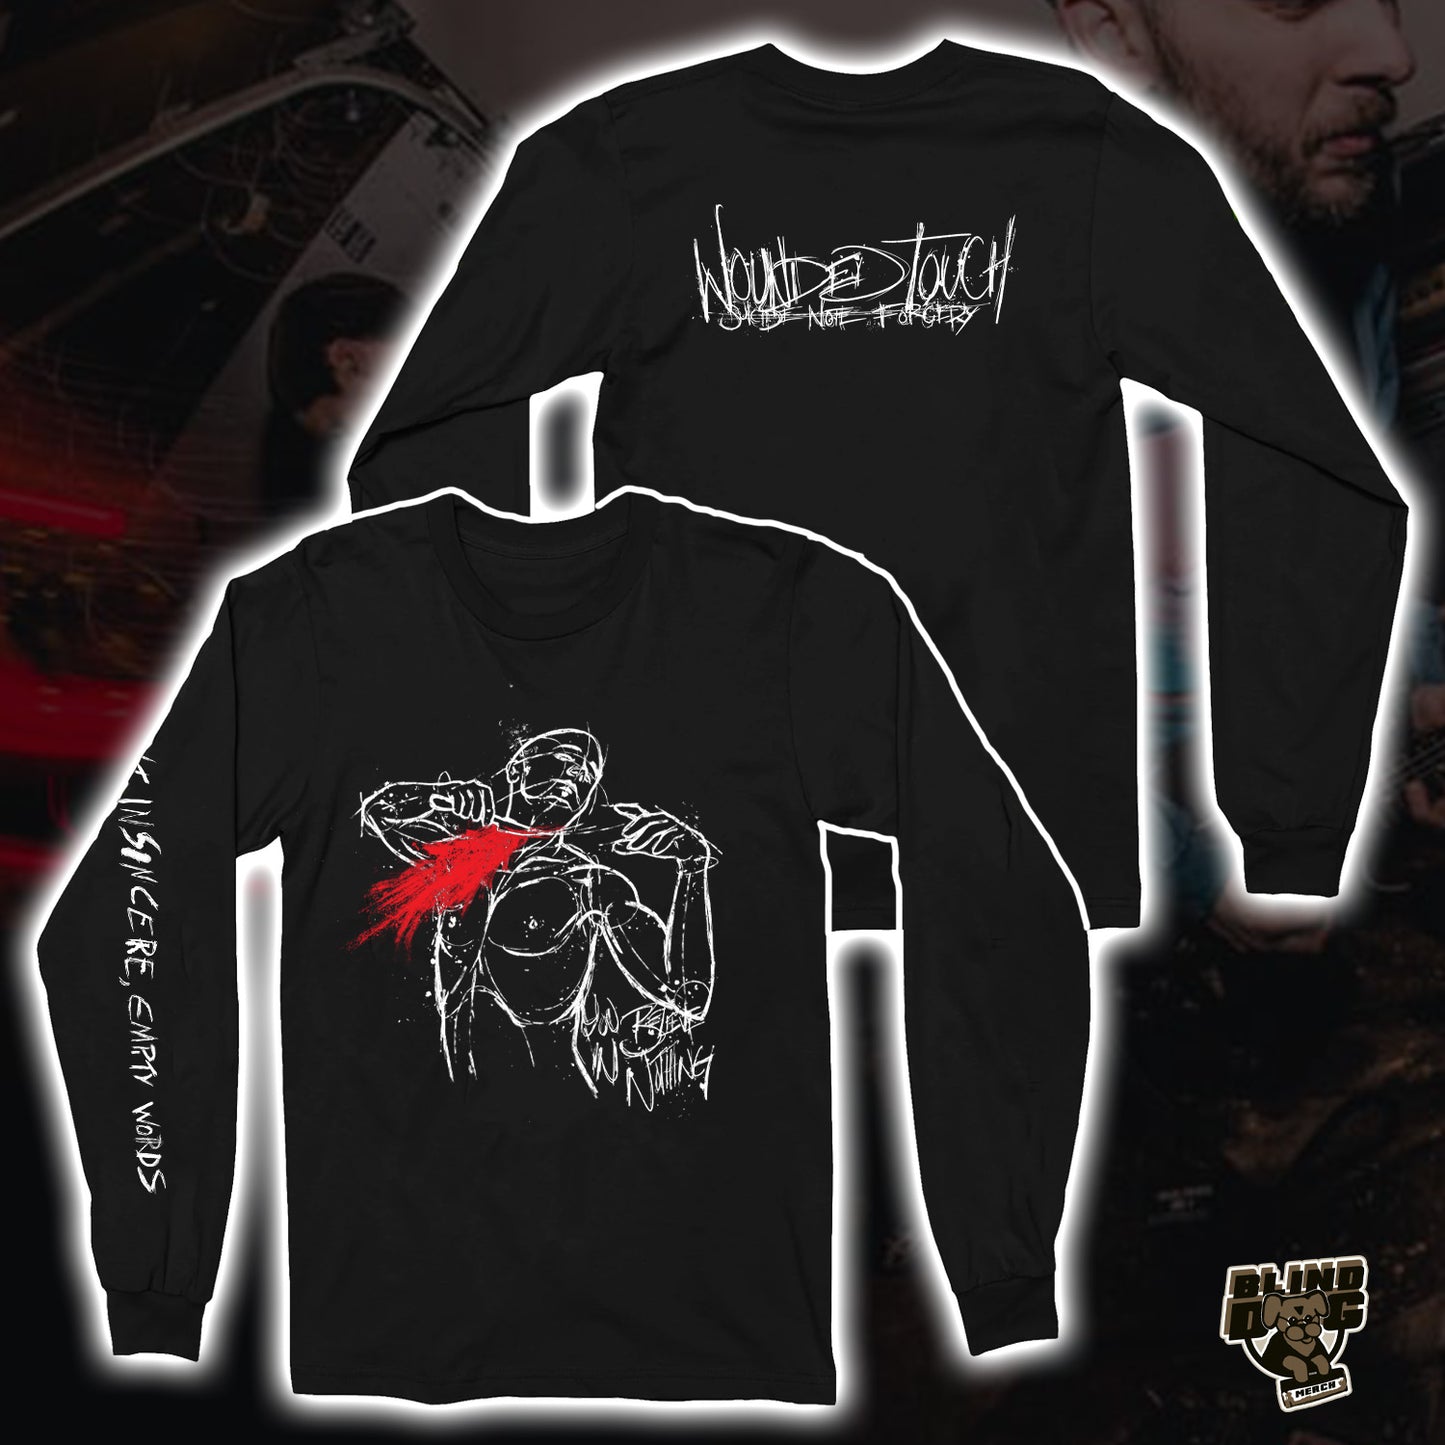 Wounded Touch - Suicide Note Forgery (Long Sleeve T-Shirt)